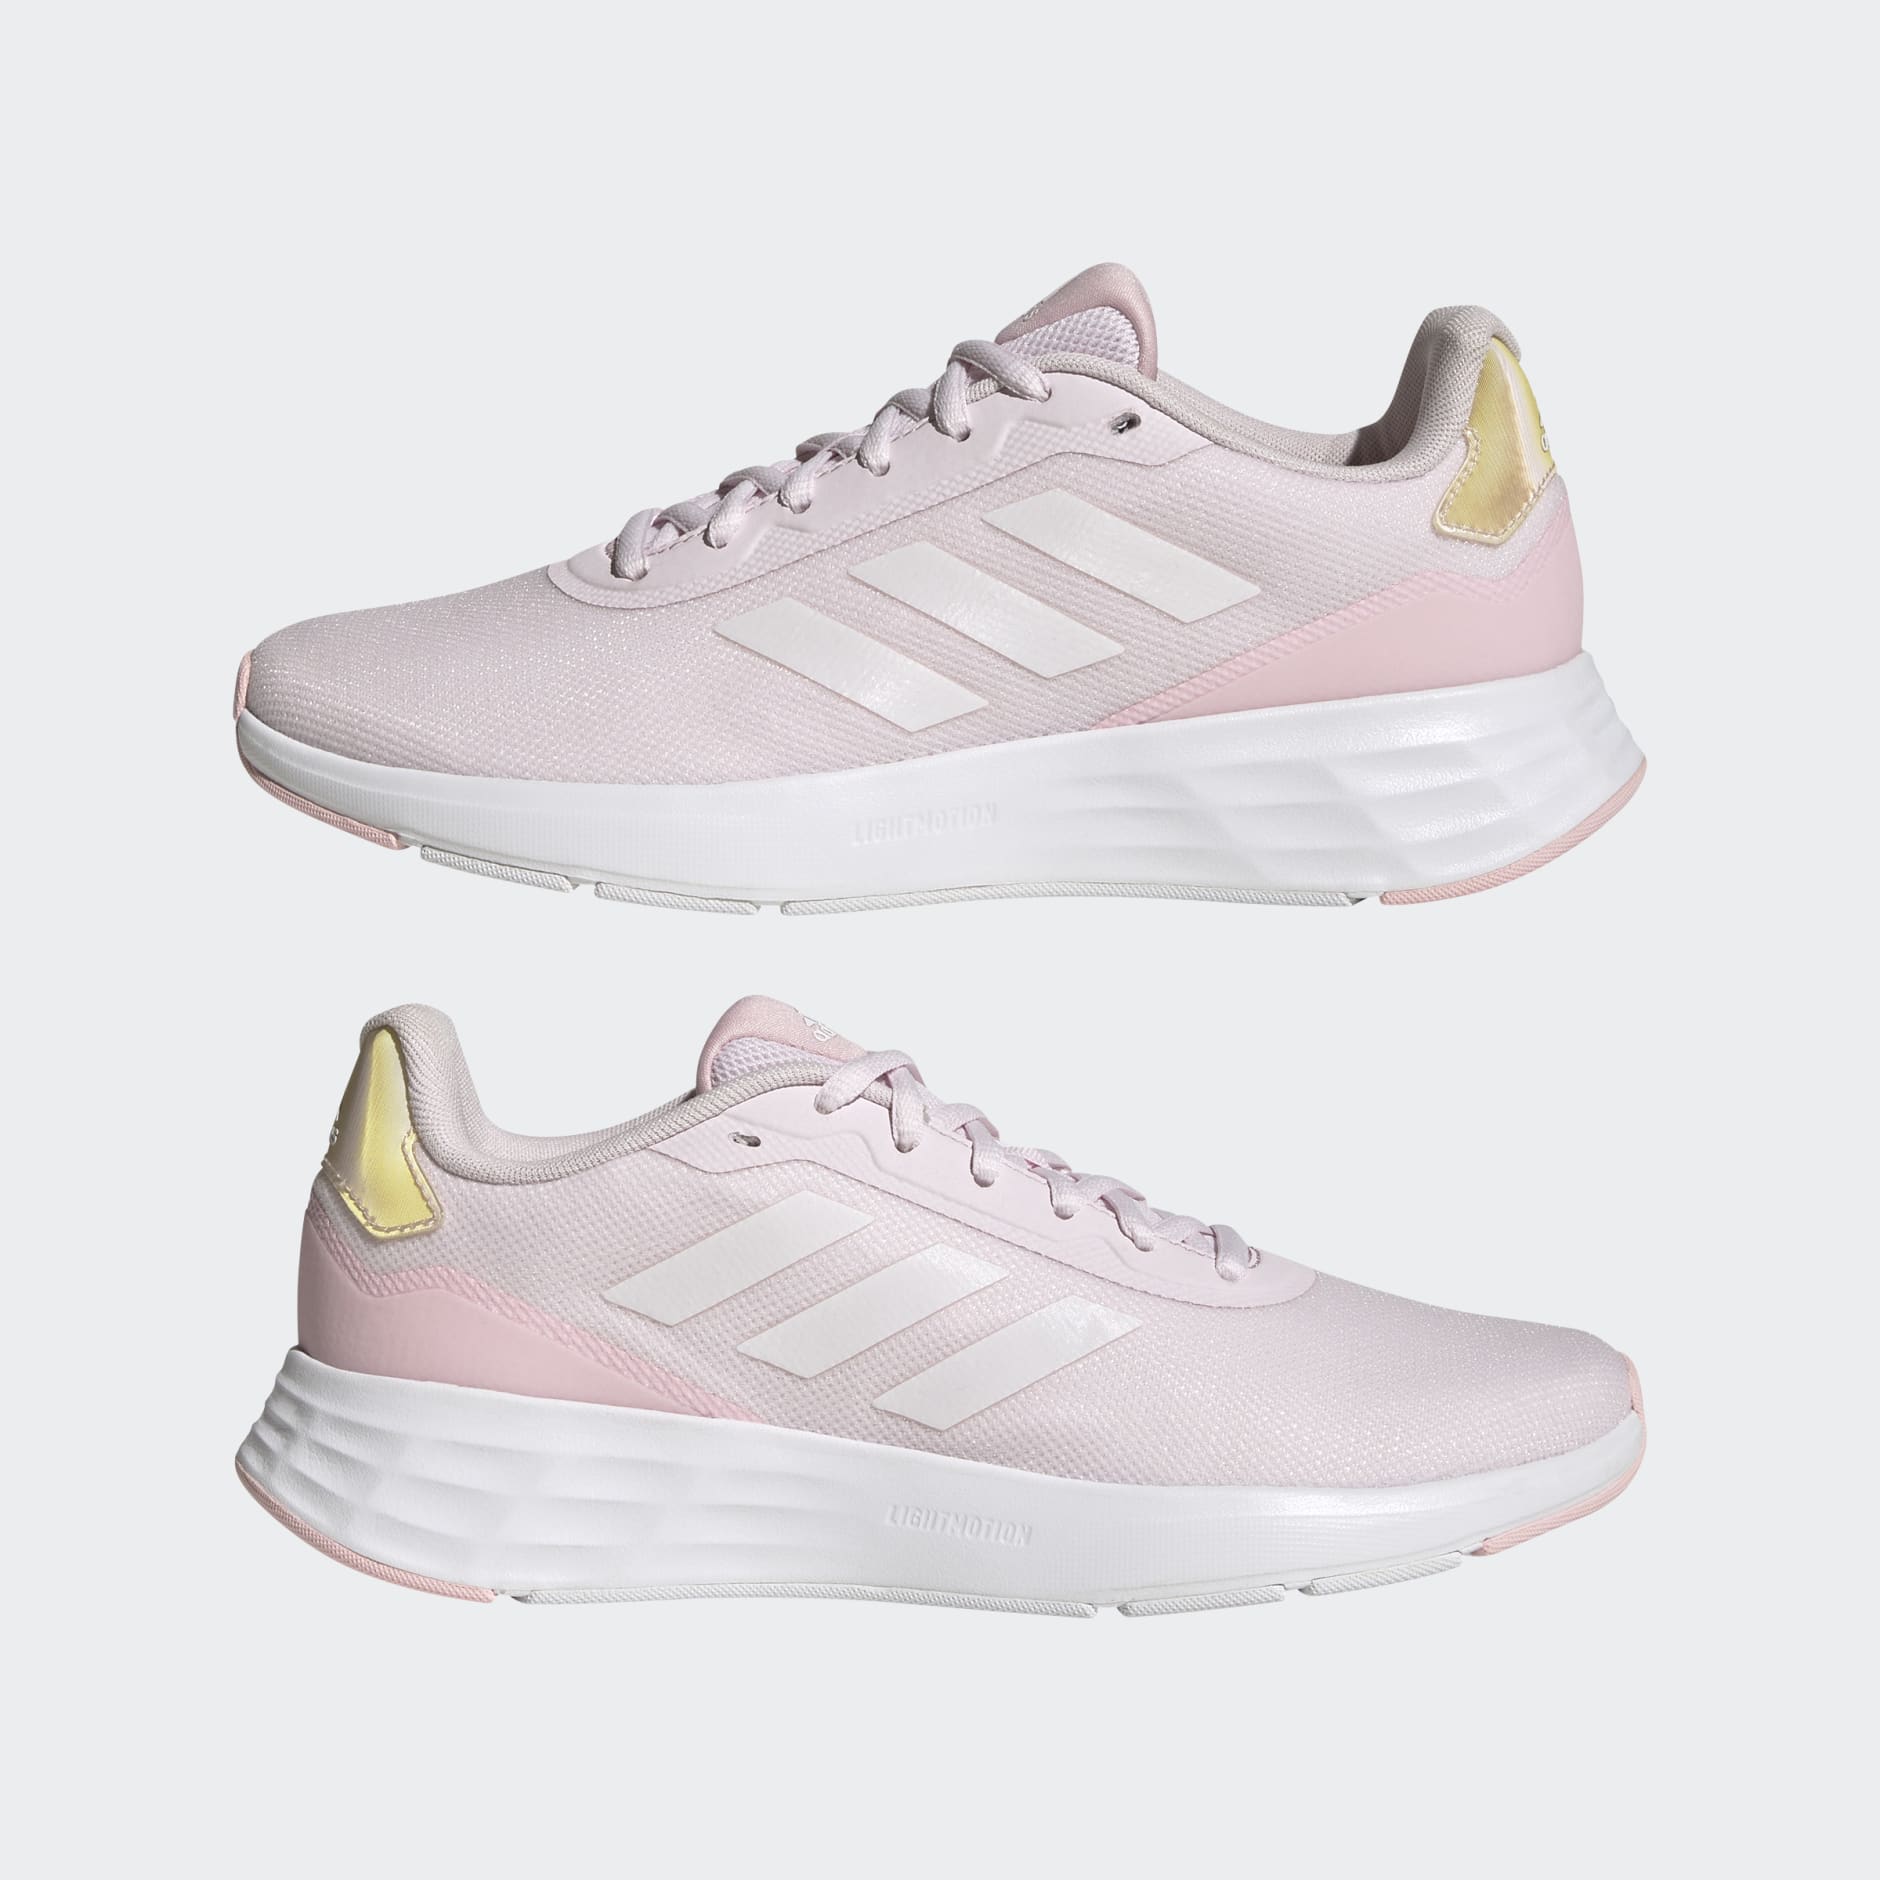 desirable scream Upset adidas shoes light pink know Rest confirm